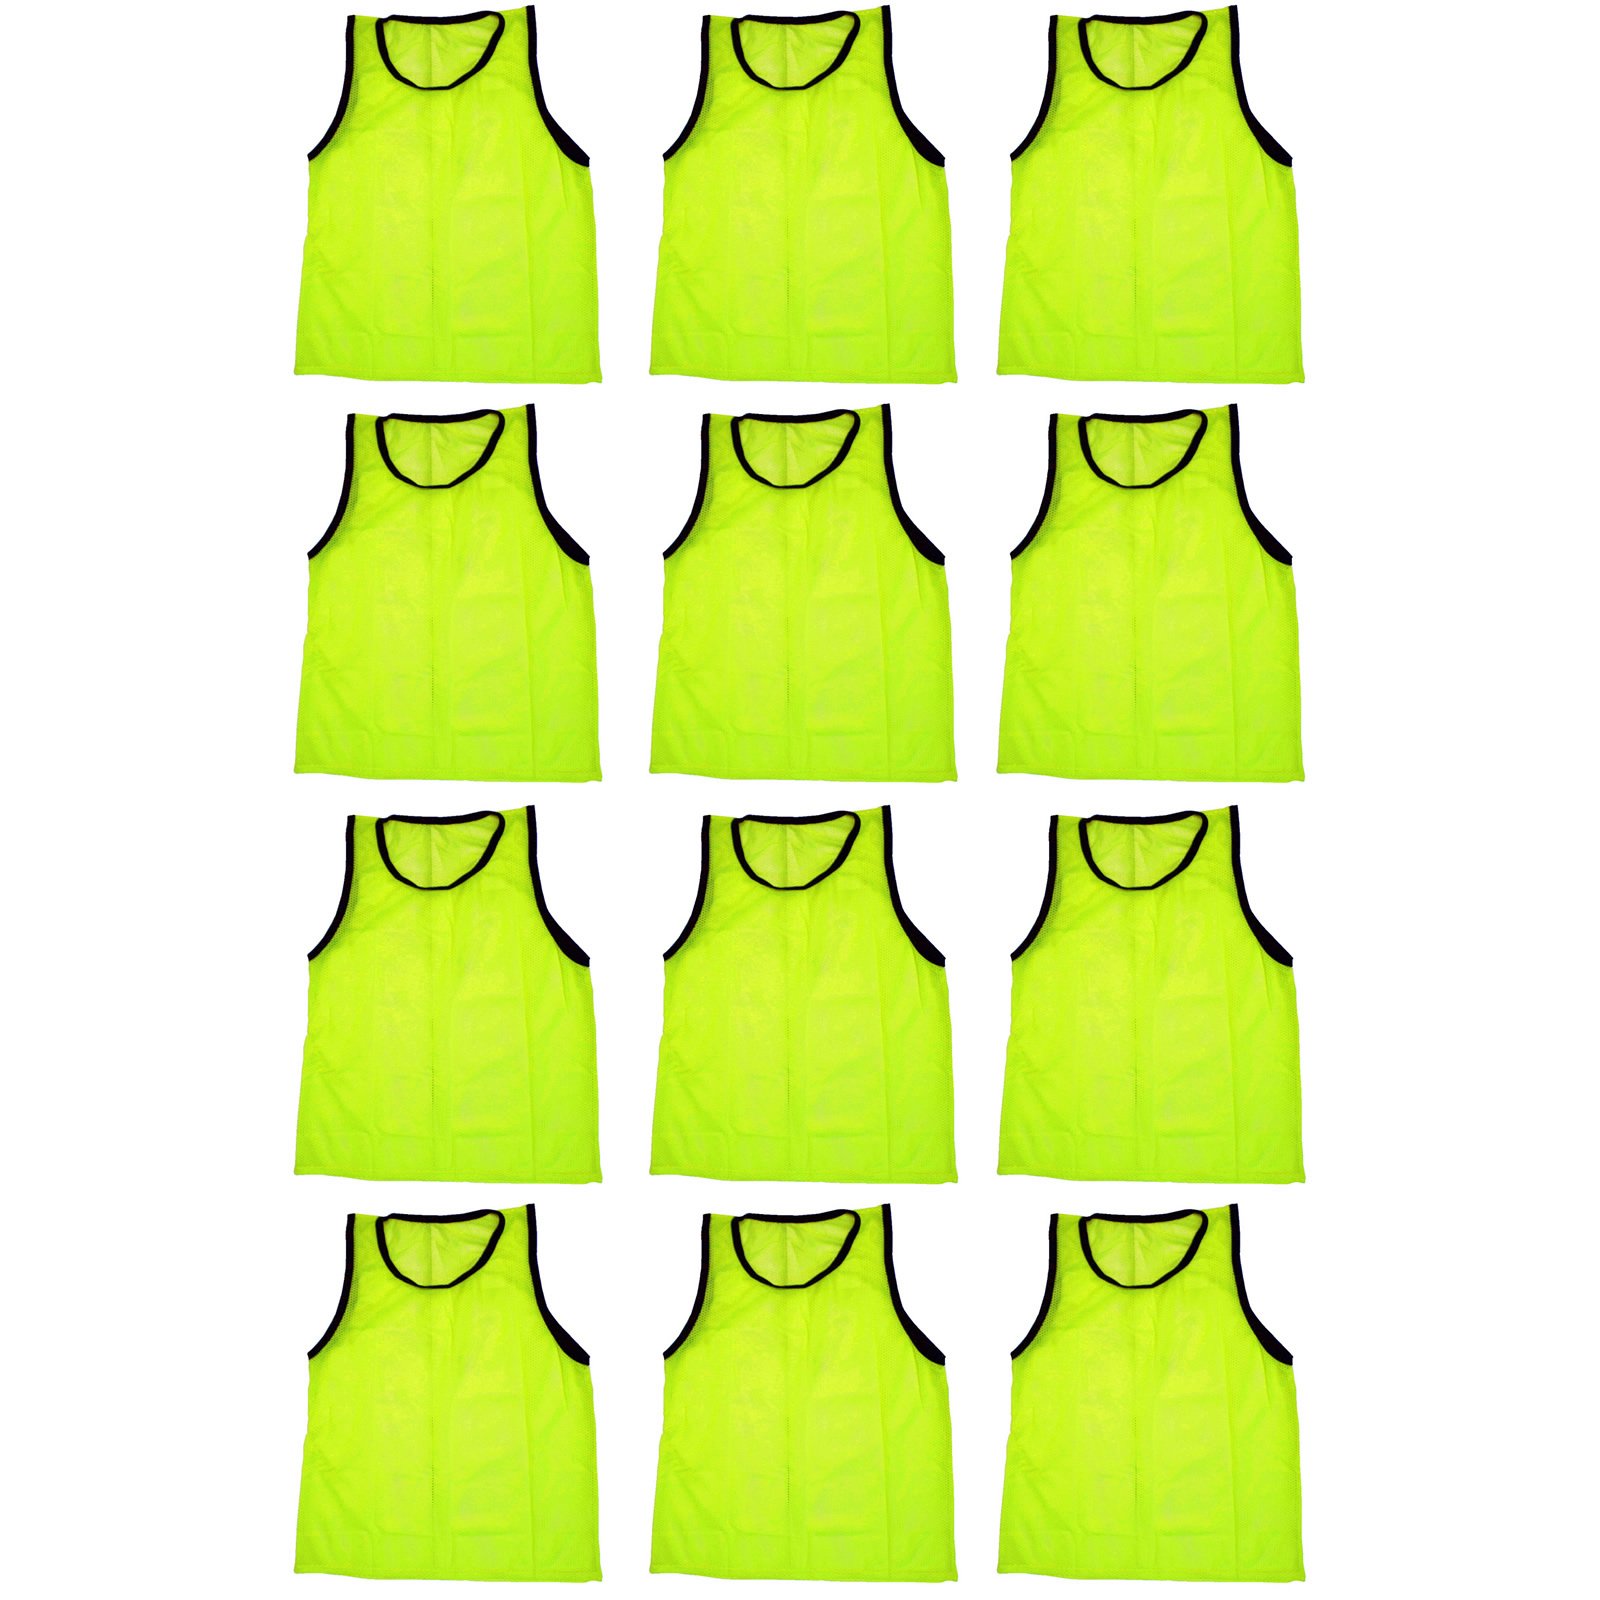 BlueDot Trading Adult Sports Pinnie Scrimmage Training Vest, Yellow, 12 Pack